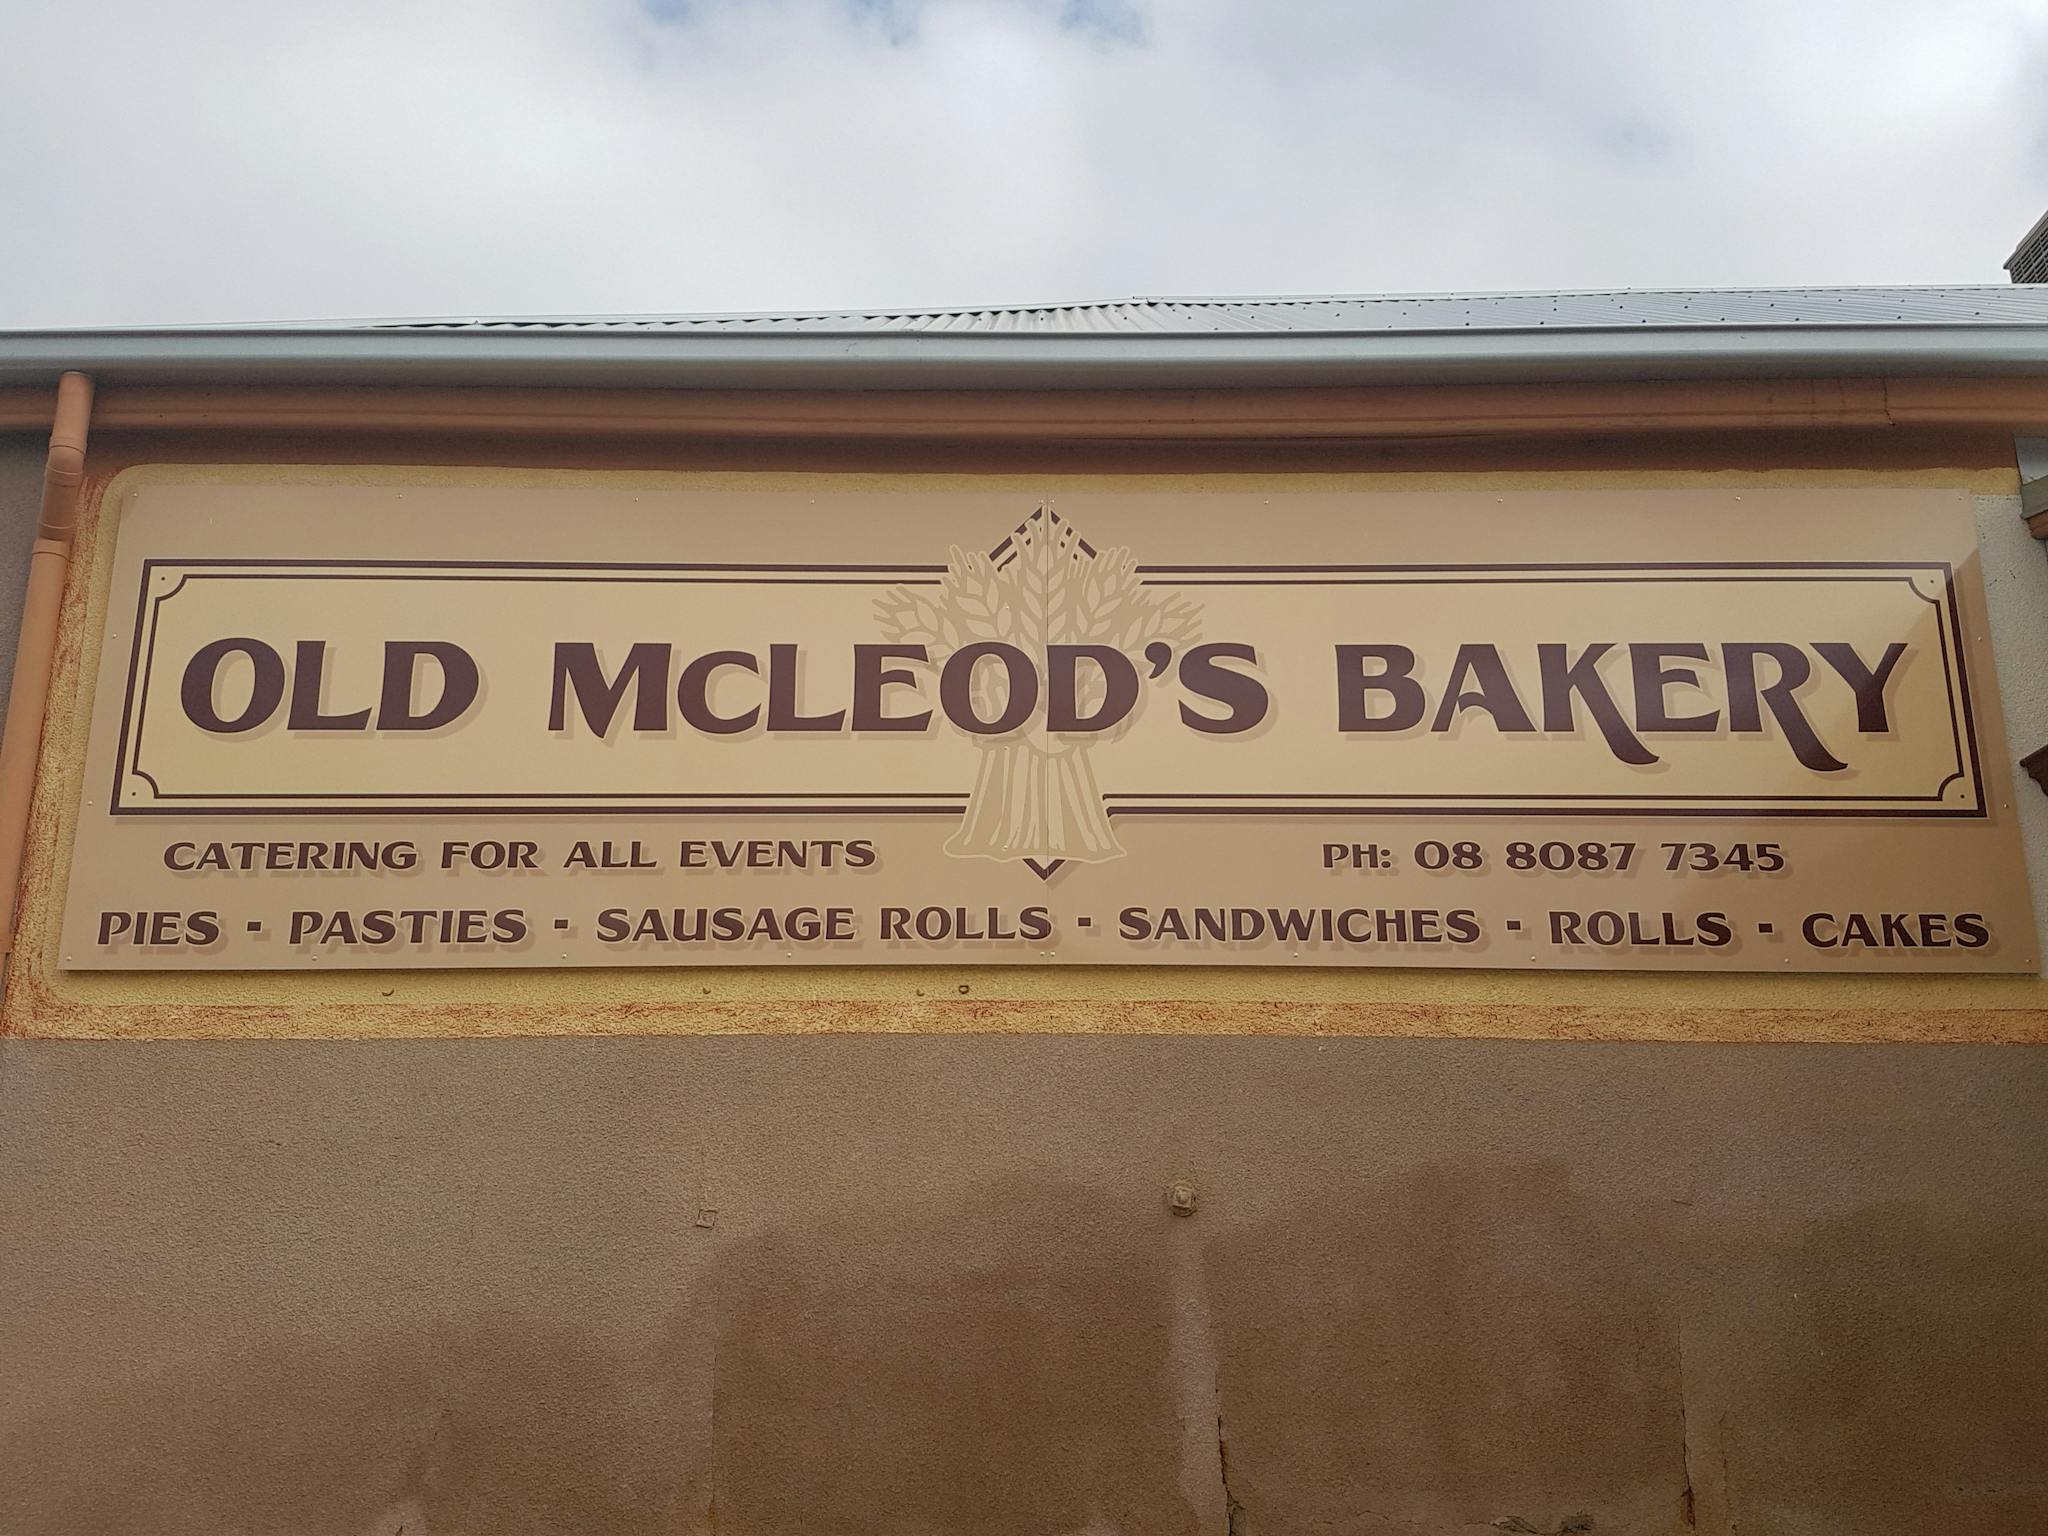 SIGN OF BAKERY